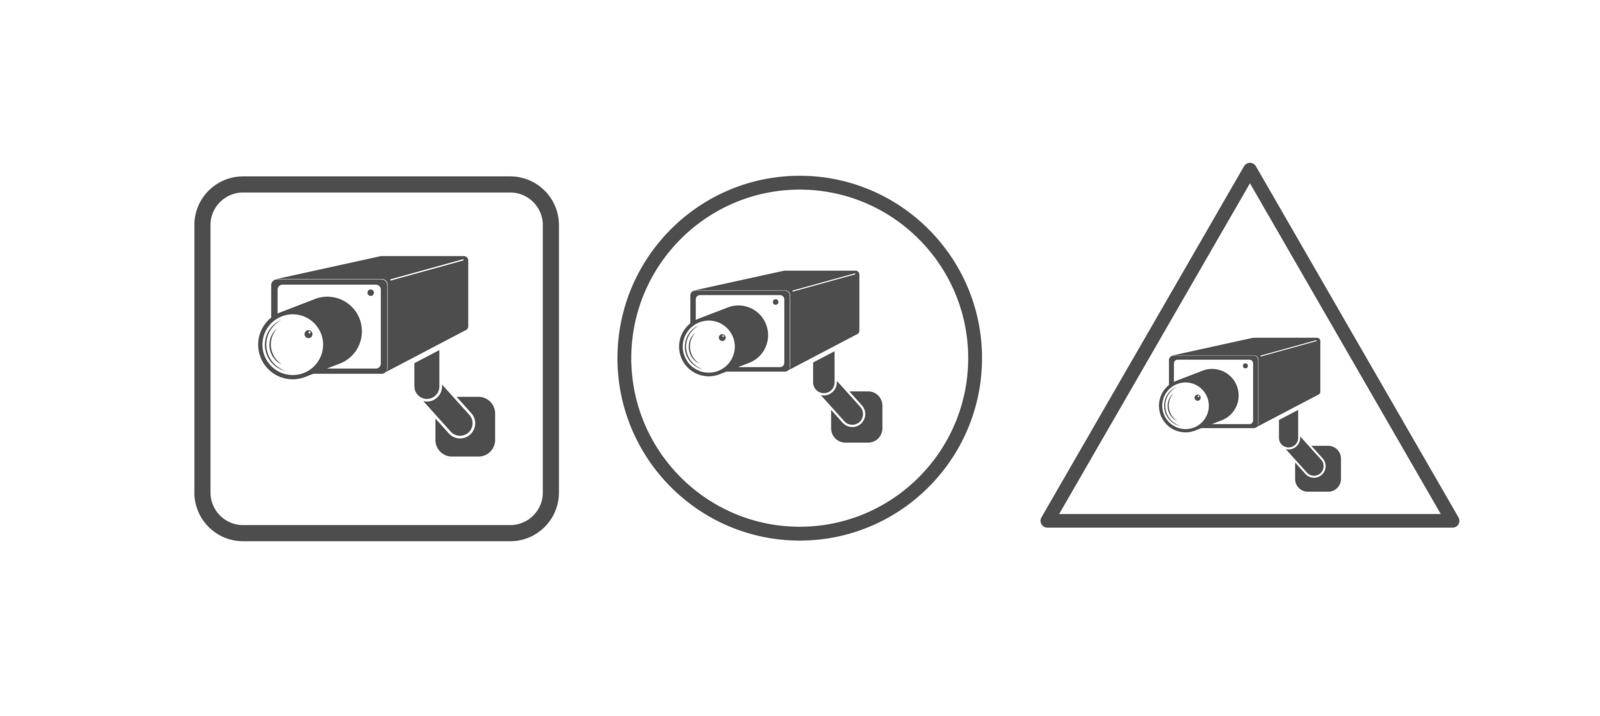 Set of icons of video surveillance. Camcorder icons. Empty outline, flat style.